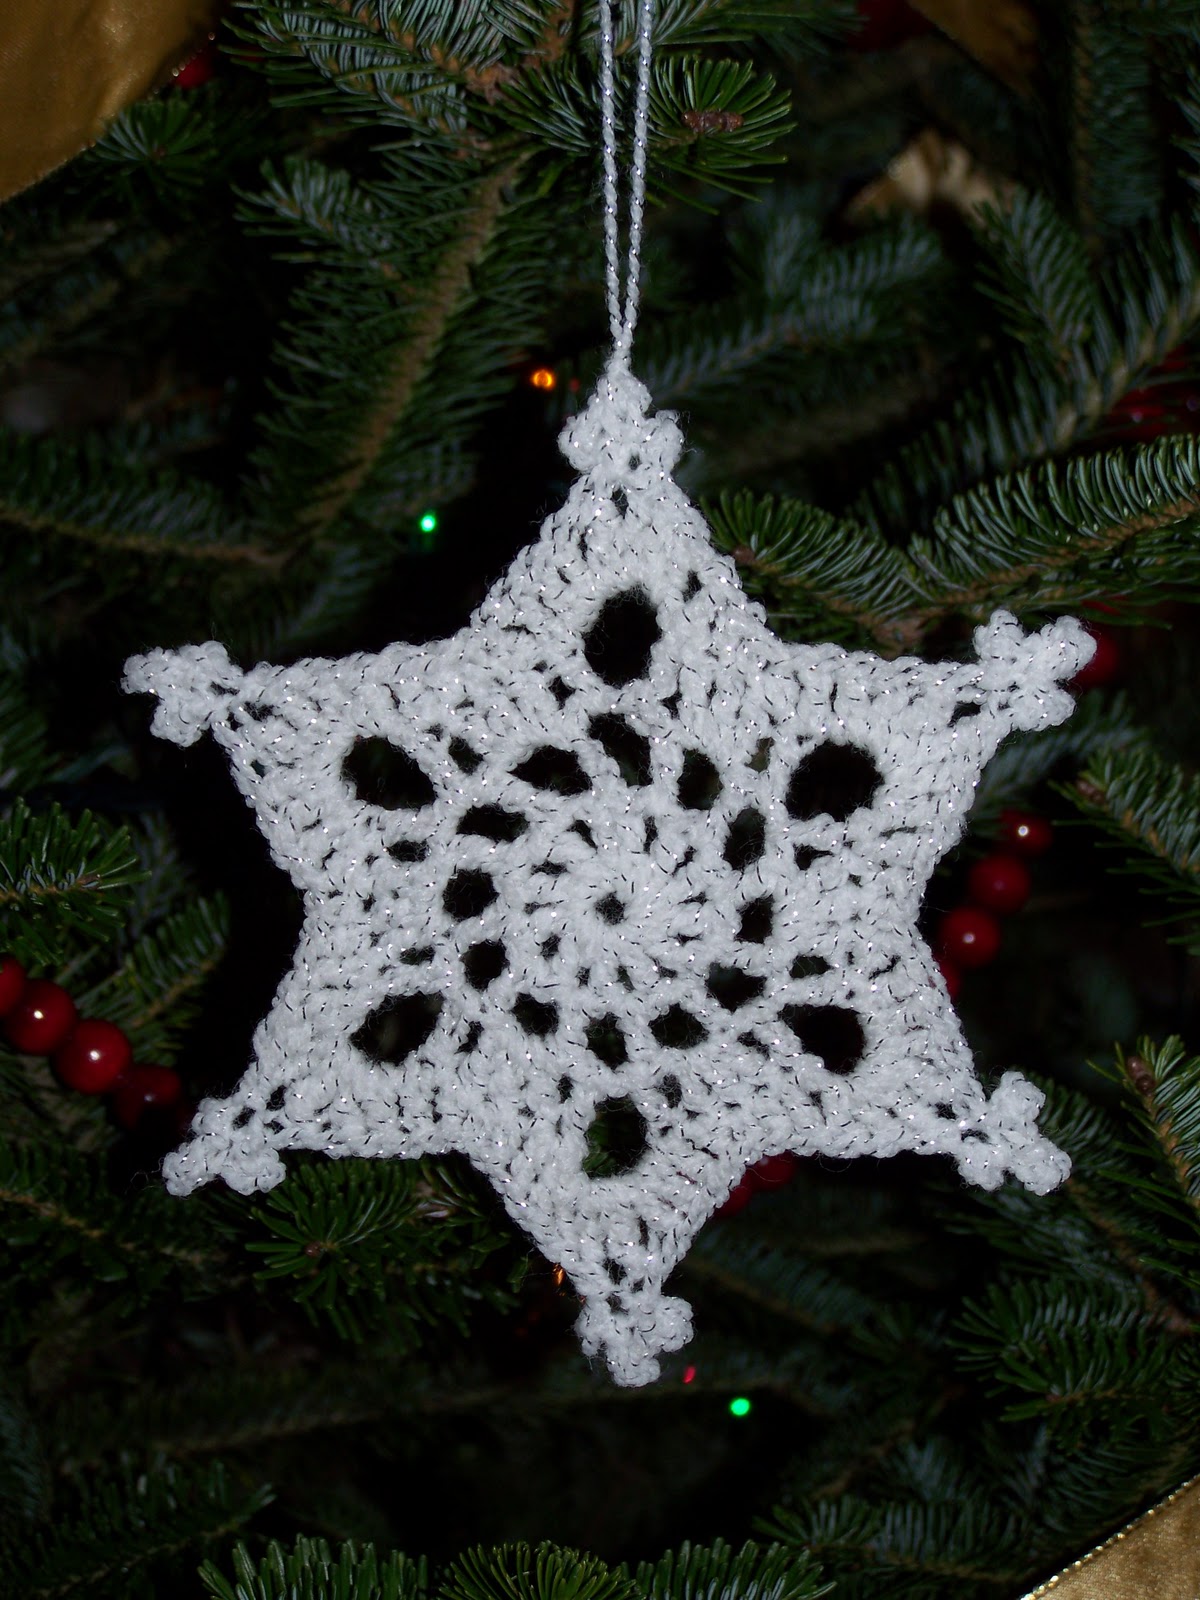 When Life Gives You Scraps, Make Quilts!: Crocheted Snowflake Ornaments